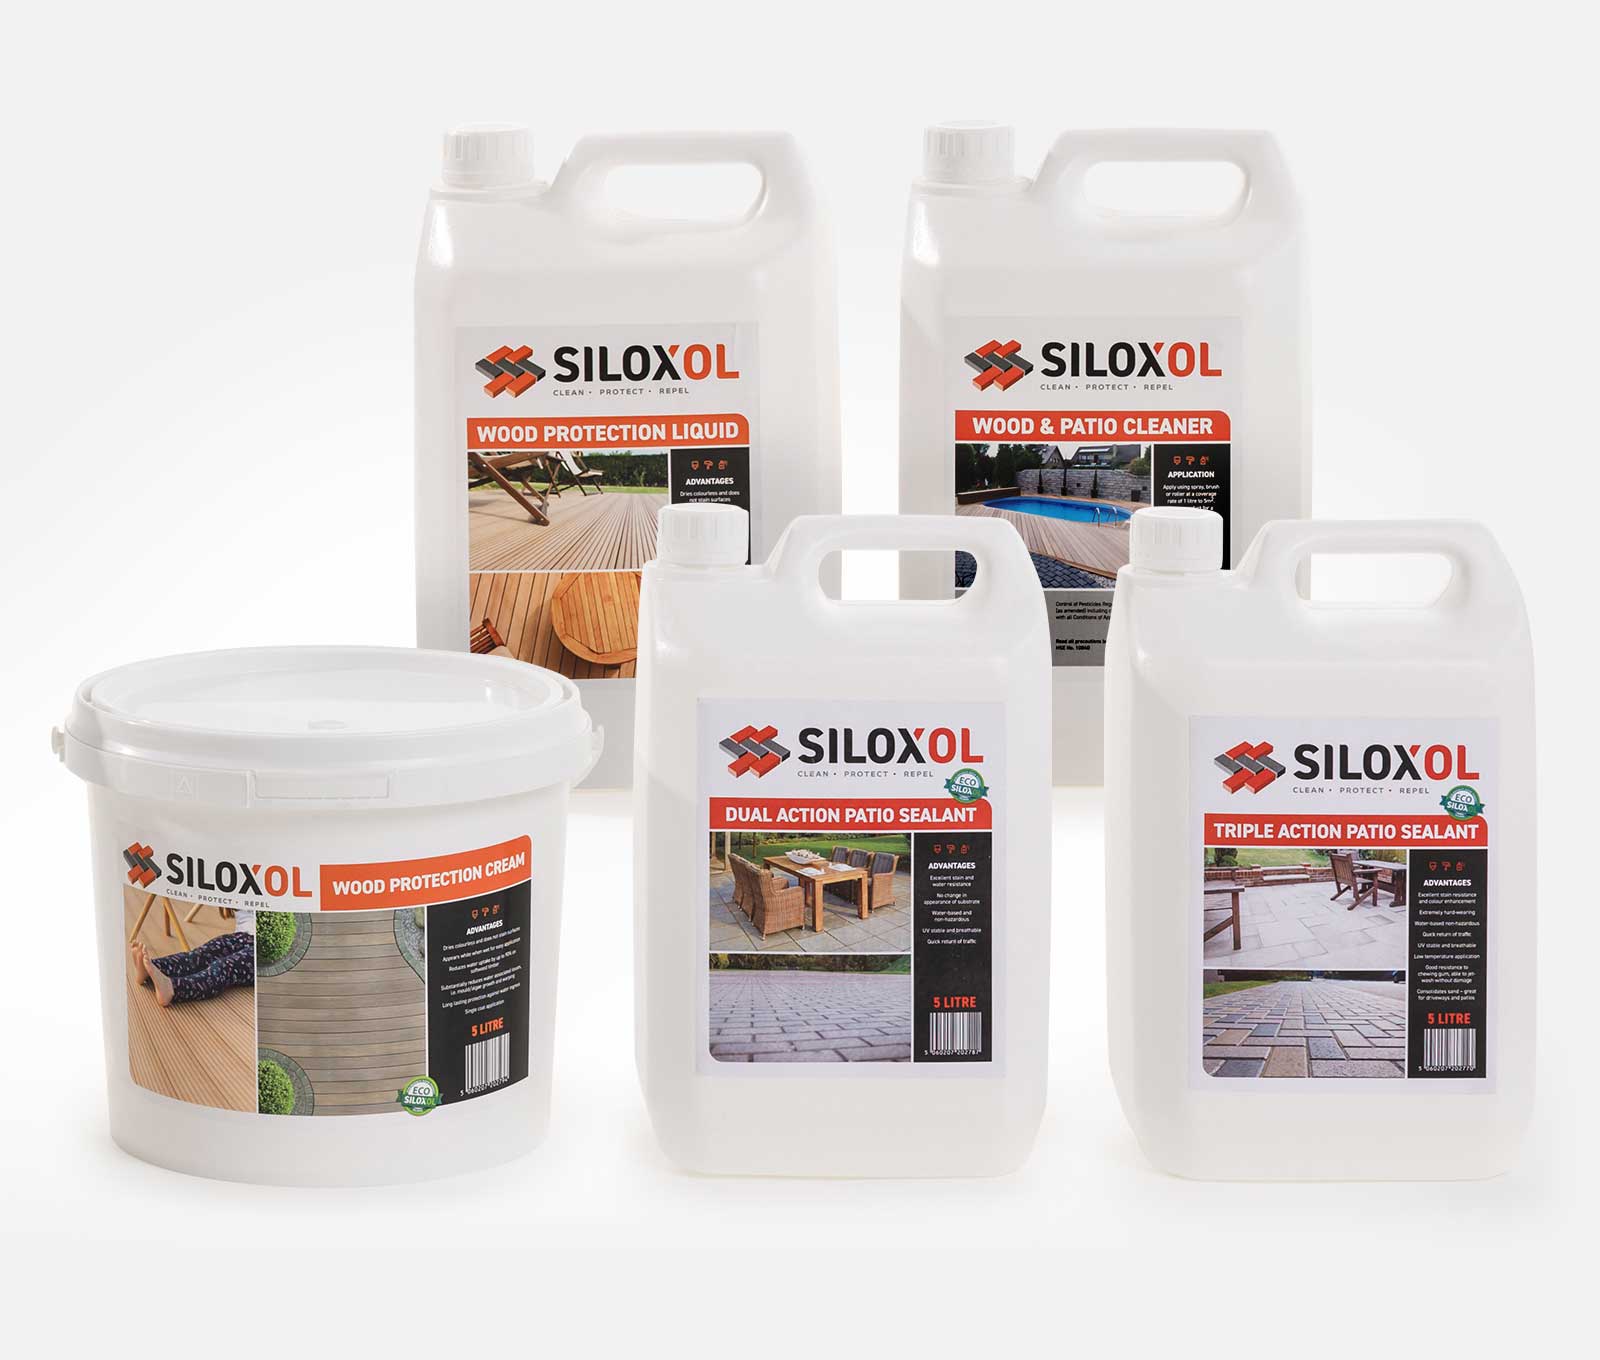 NEW Products - Our Siloxol Range